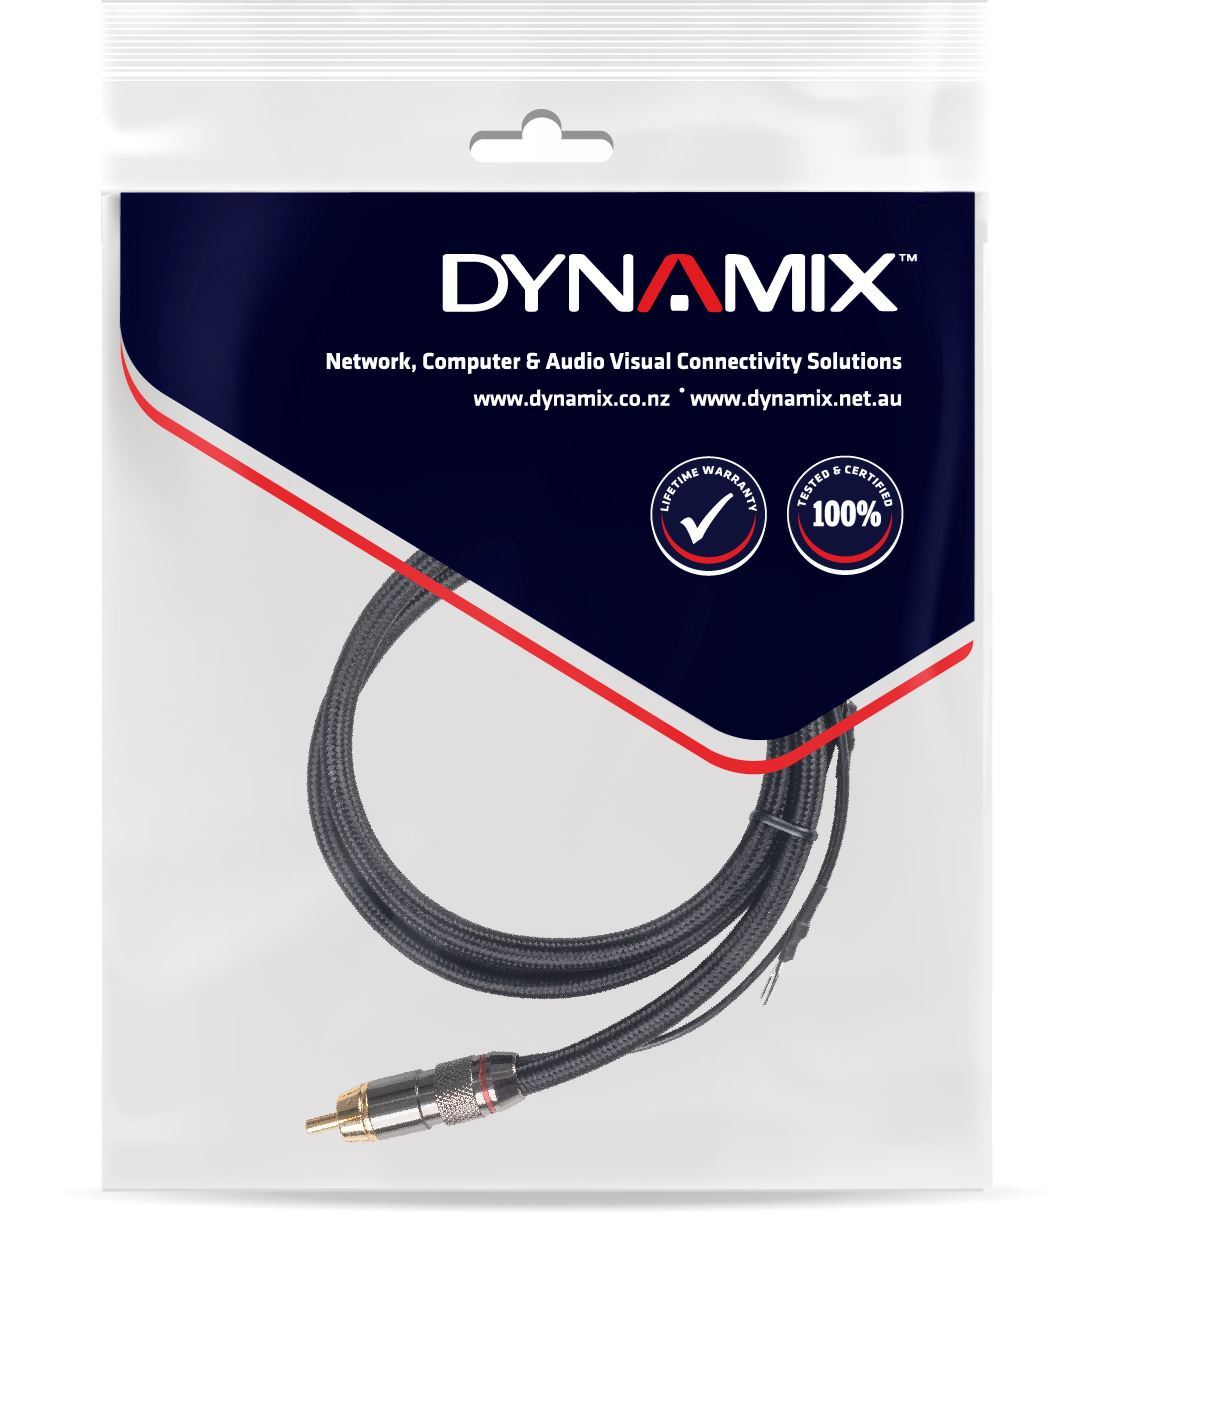 DYNAMIX_6m_Coaxial_Subwoofer_Cable_RCA_Male_to_Male_with_Grounding_Spade_Connectors 514